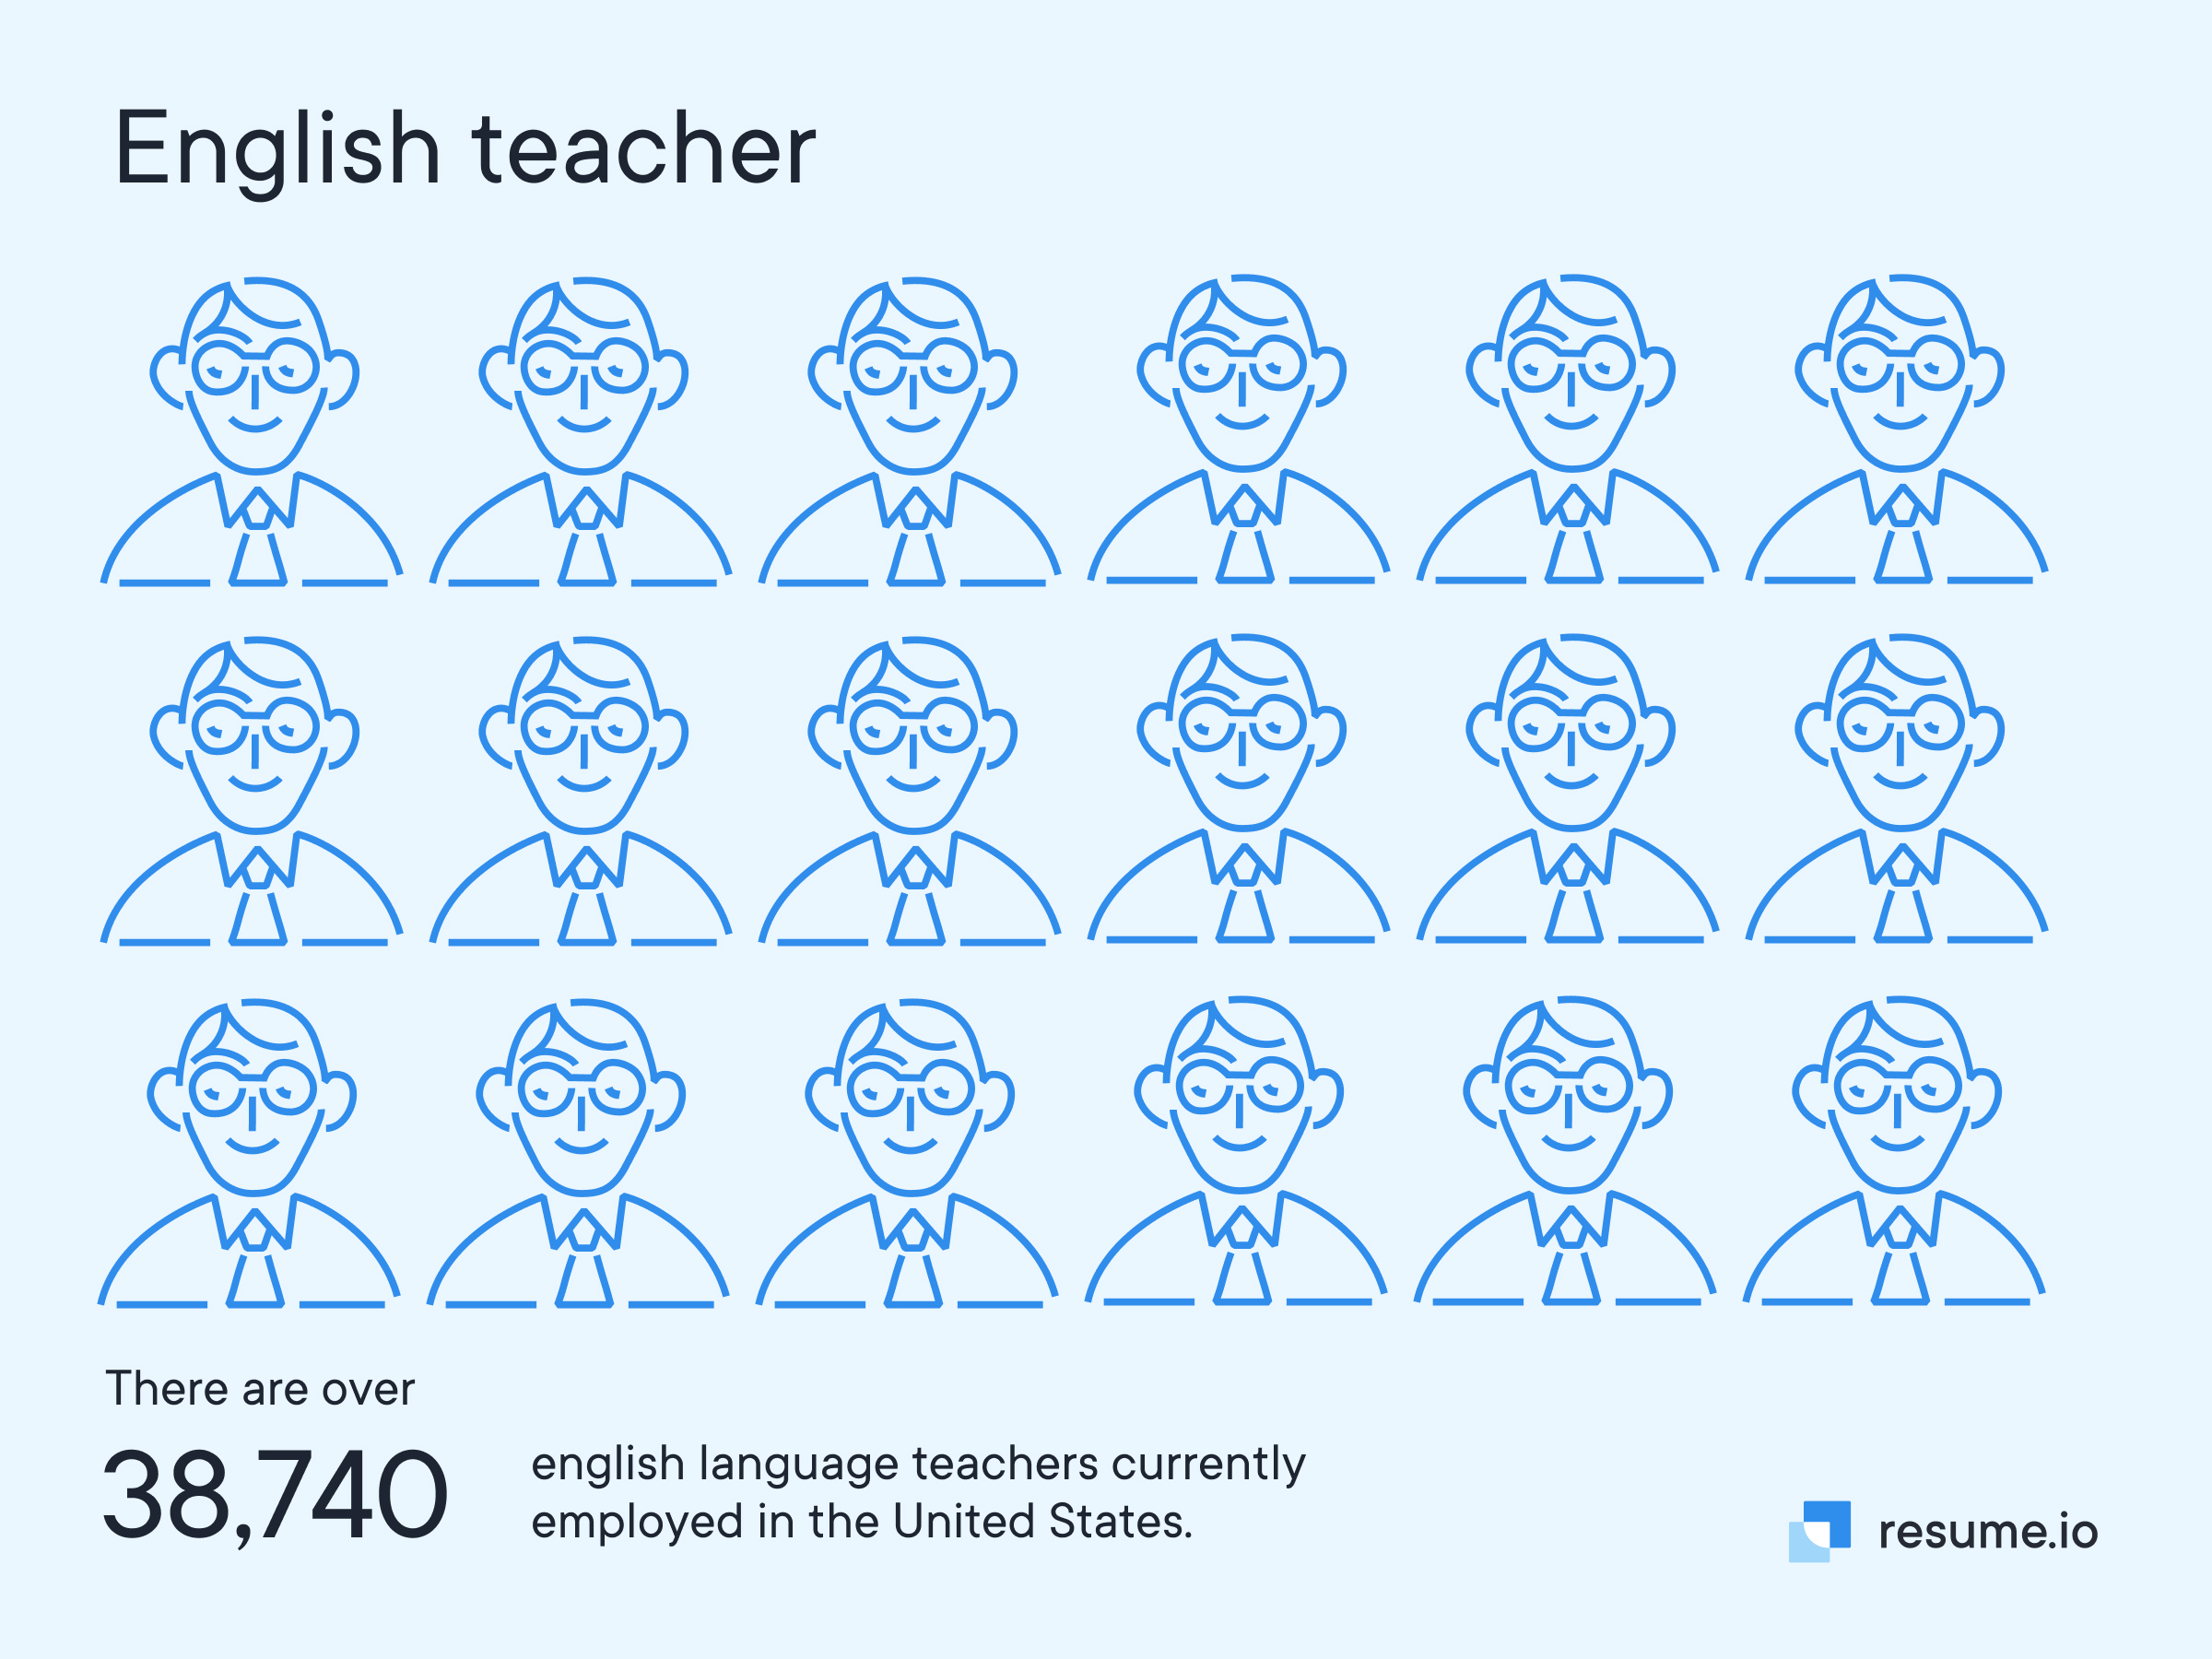 There are over 38,740 English language teachers in the US